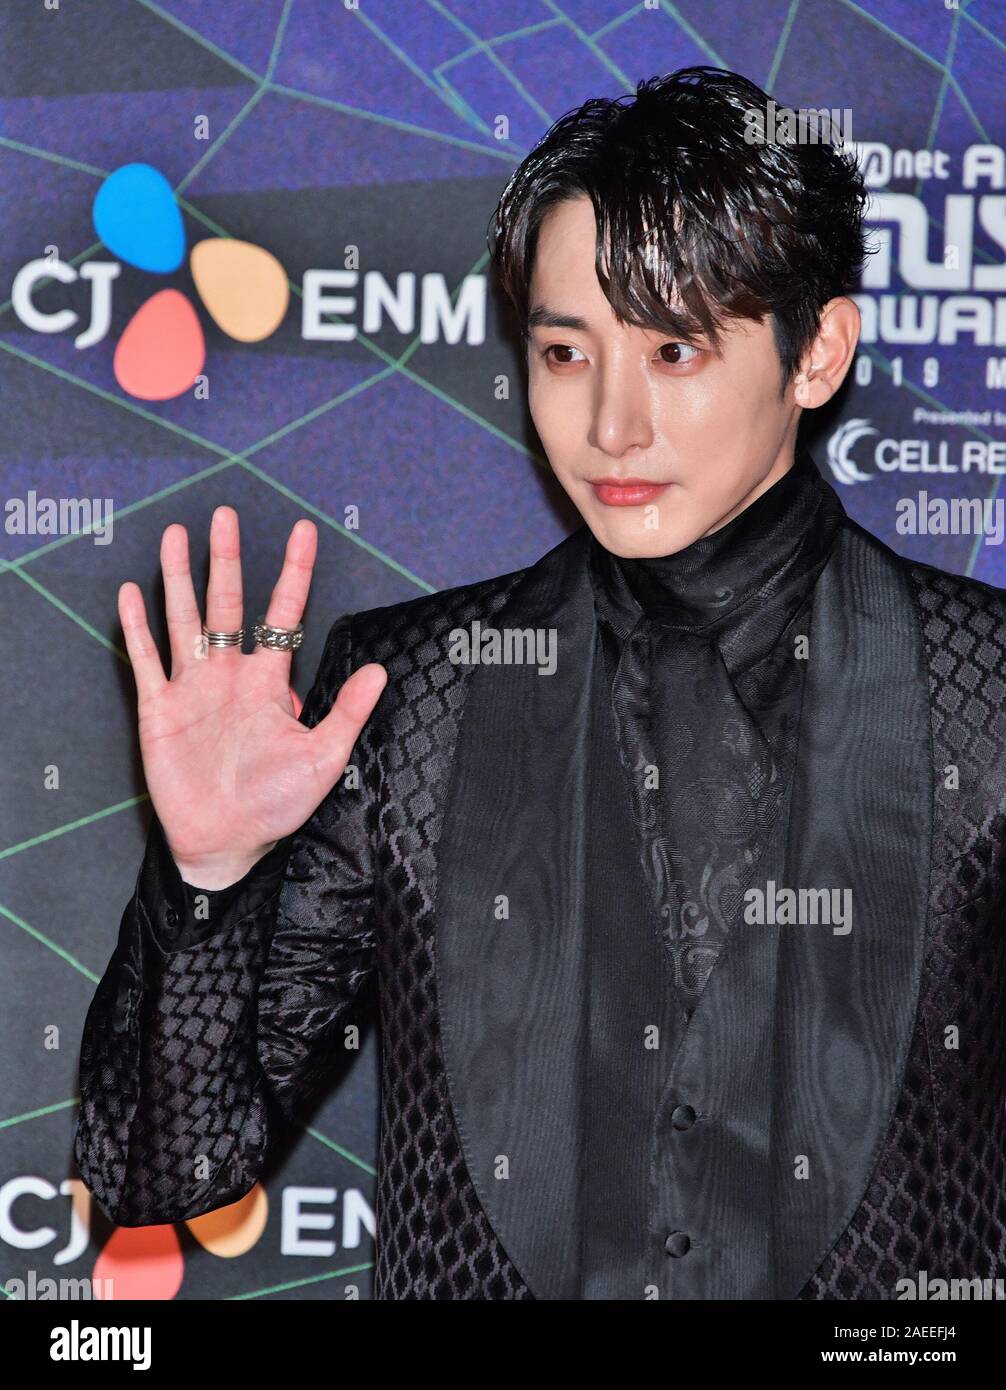 South Korean actor Lee Soo-hyuk attends the photo call during the 2019  MAMA(Mnet Asian Music Awards) at the Nagoya Dome in Nagoya,  Aichi-Prefecture, Japan on December 4, 2019. Credit: AFLO/Alamy Live News